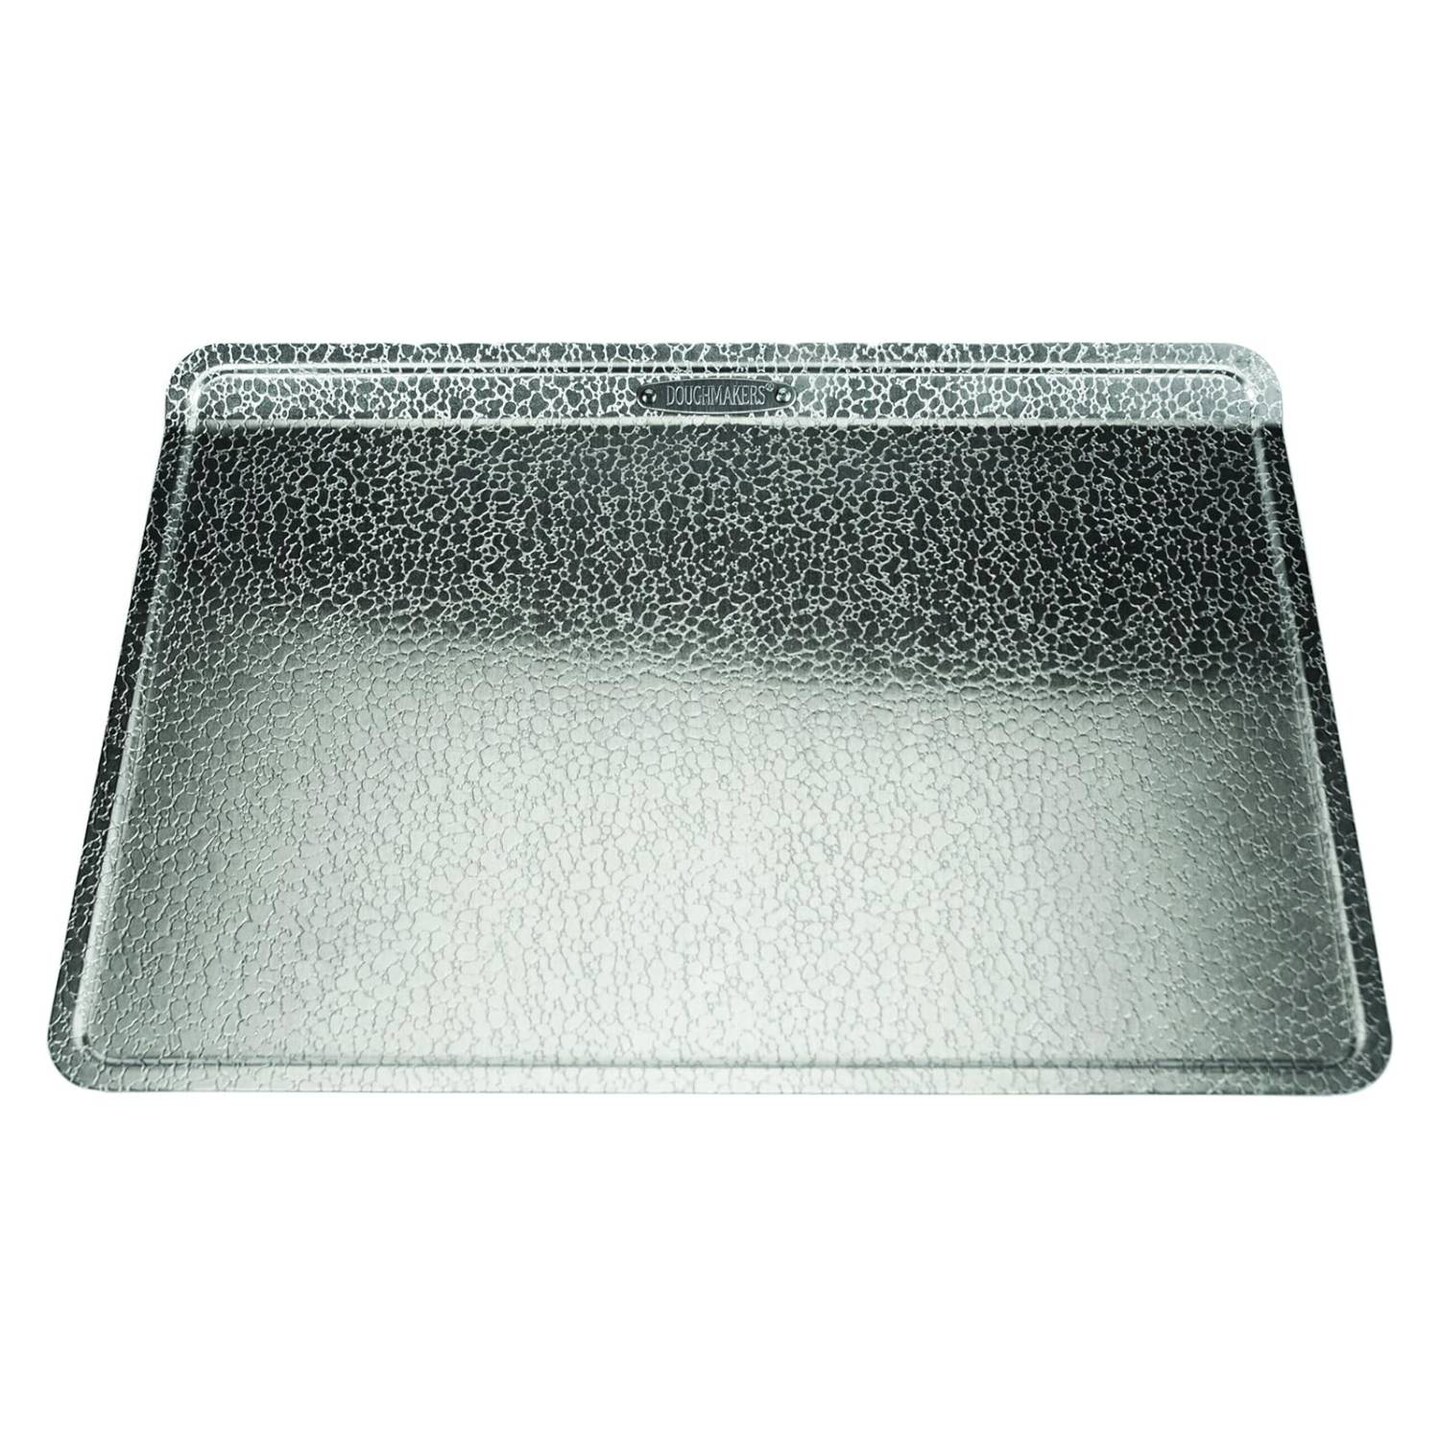 Doughmakers Great Grand Cookie Sheet